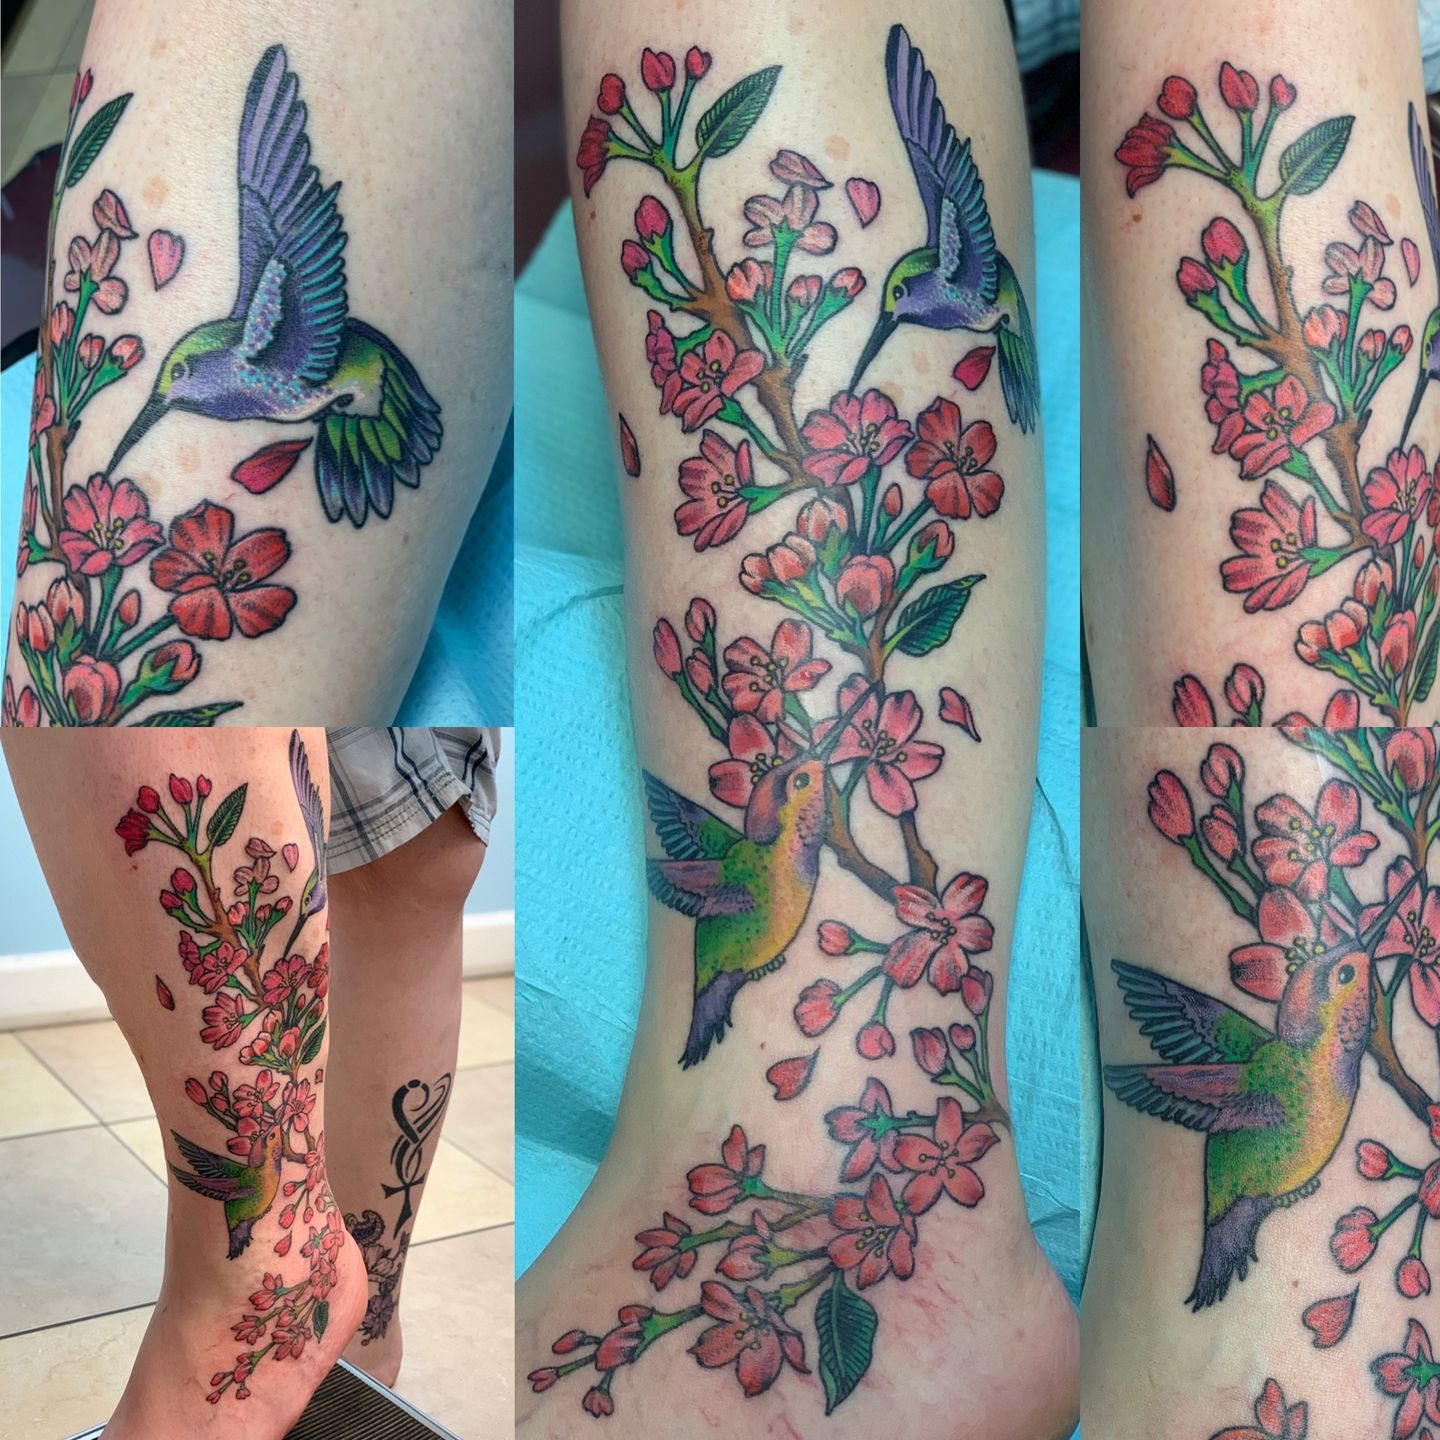 Is Tattooing Your Legs a Solution to Cover Up Varicose Veins